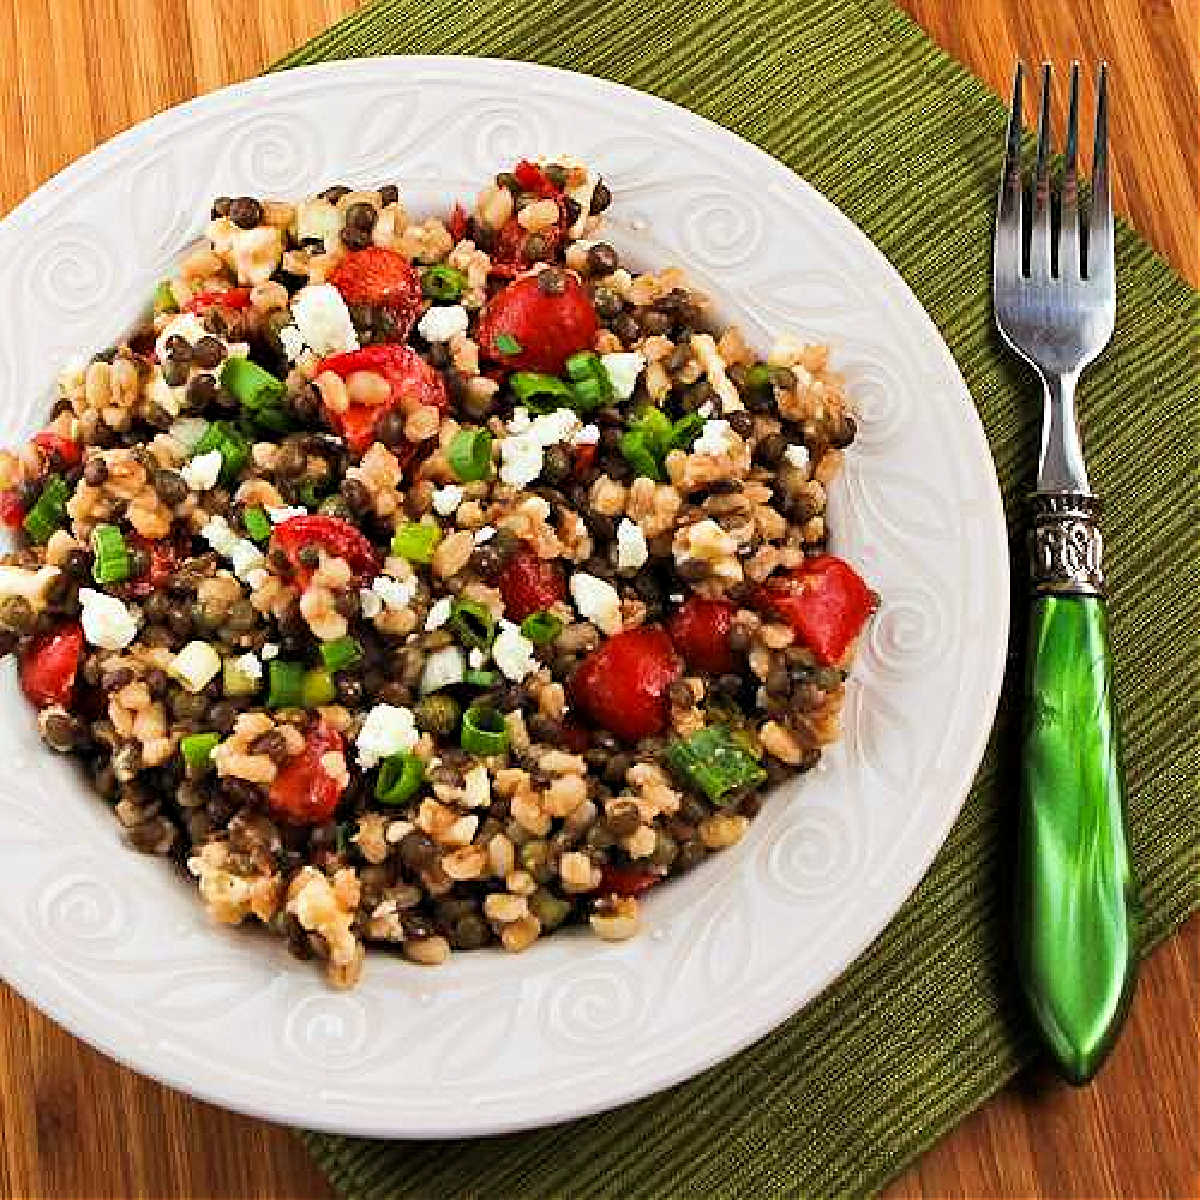 Square image for Lentil and Barley Greek-Style Salad shown on plate with fork.